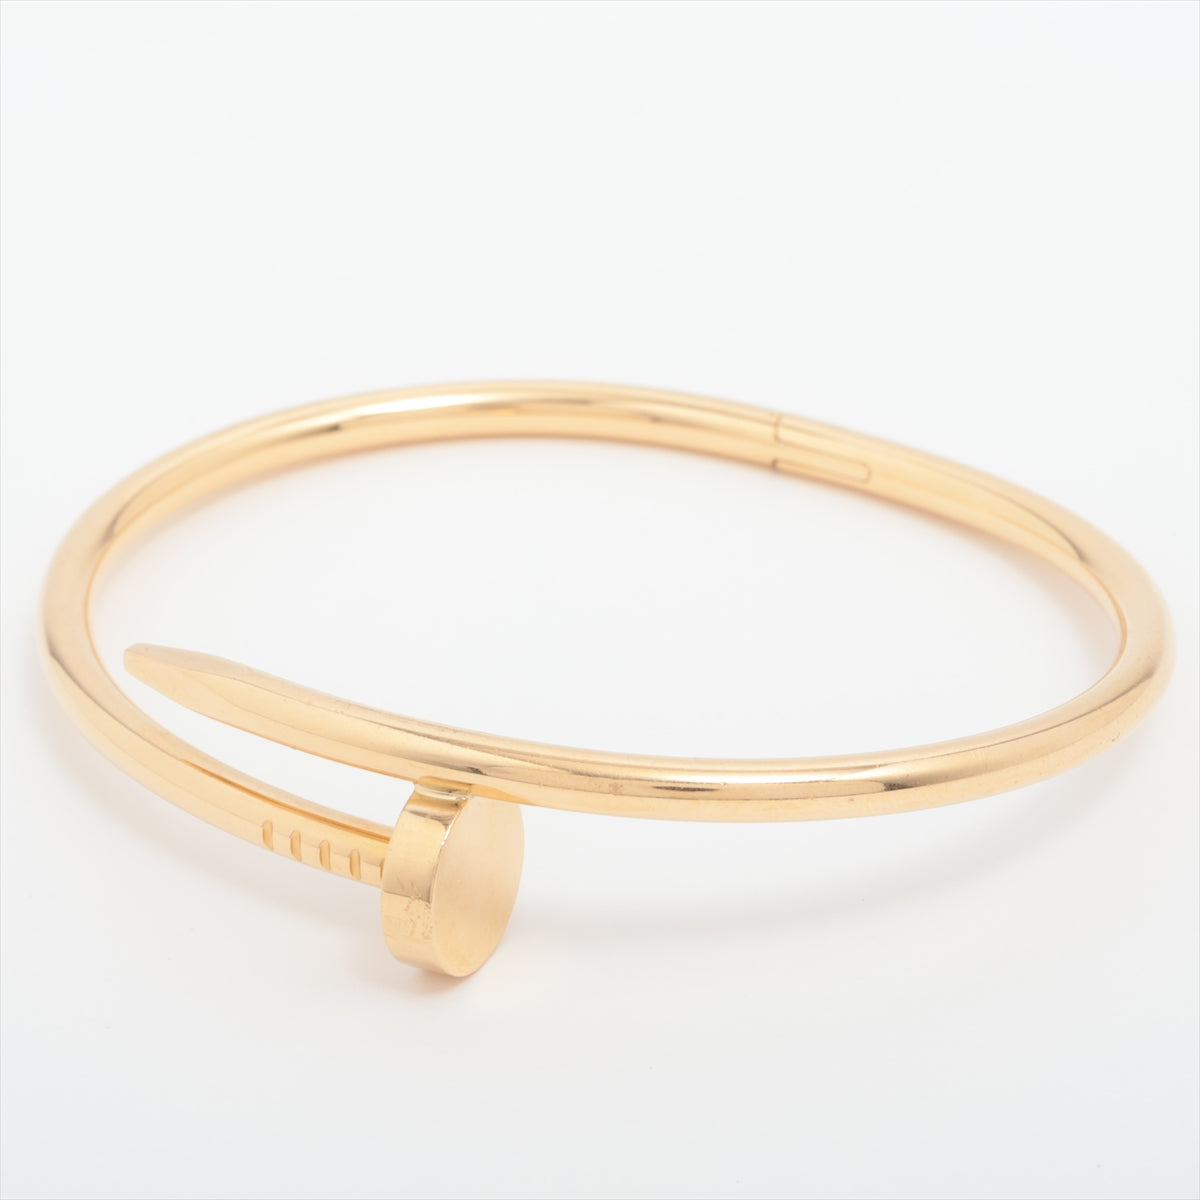 How To Sell Your Juste un Clou Bracelet - The Vault